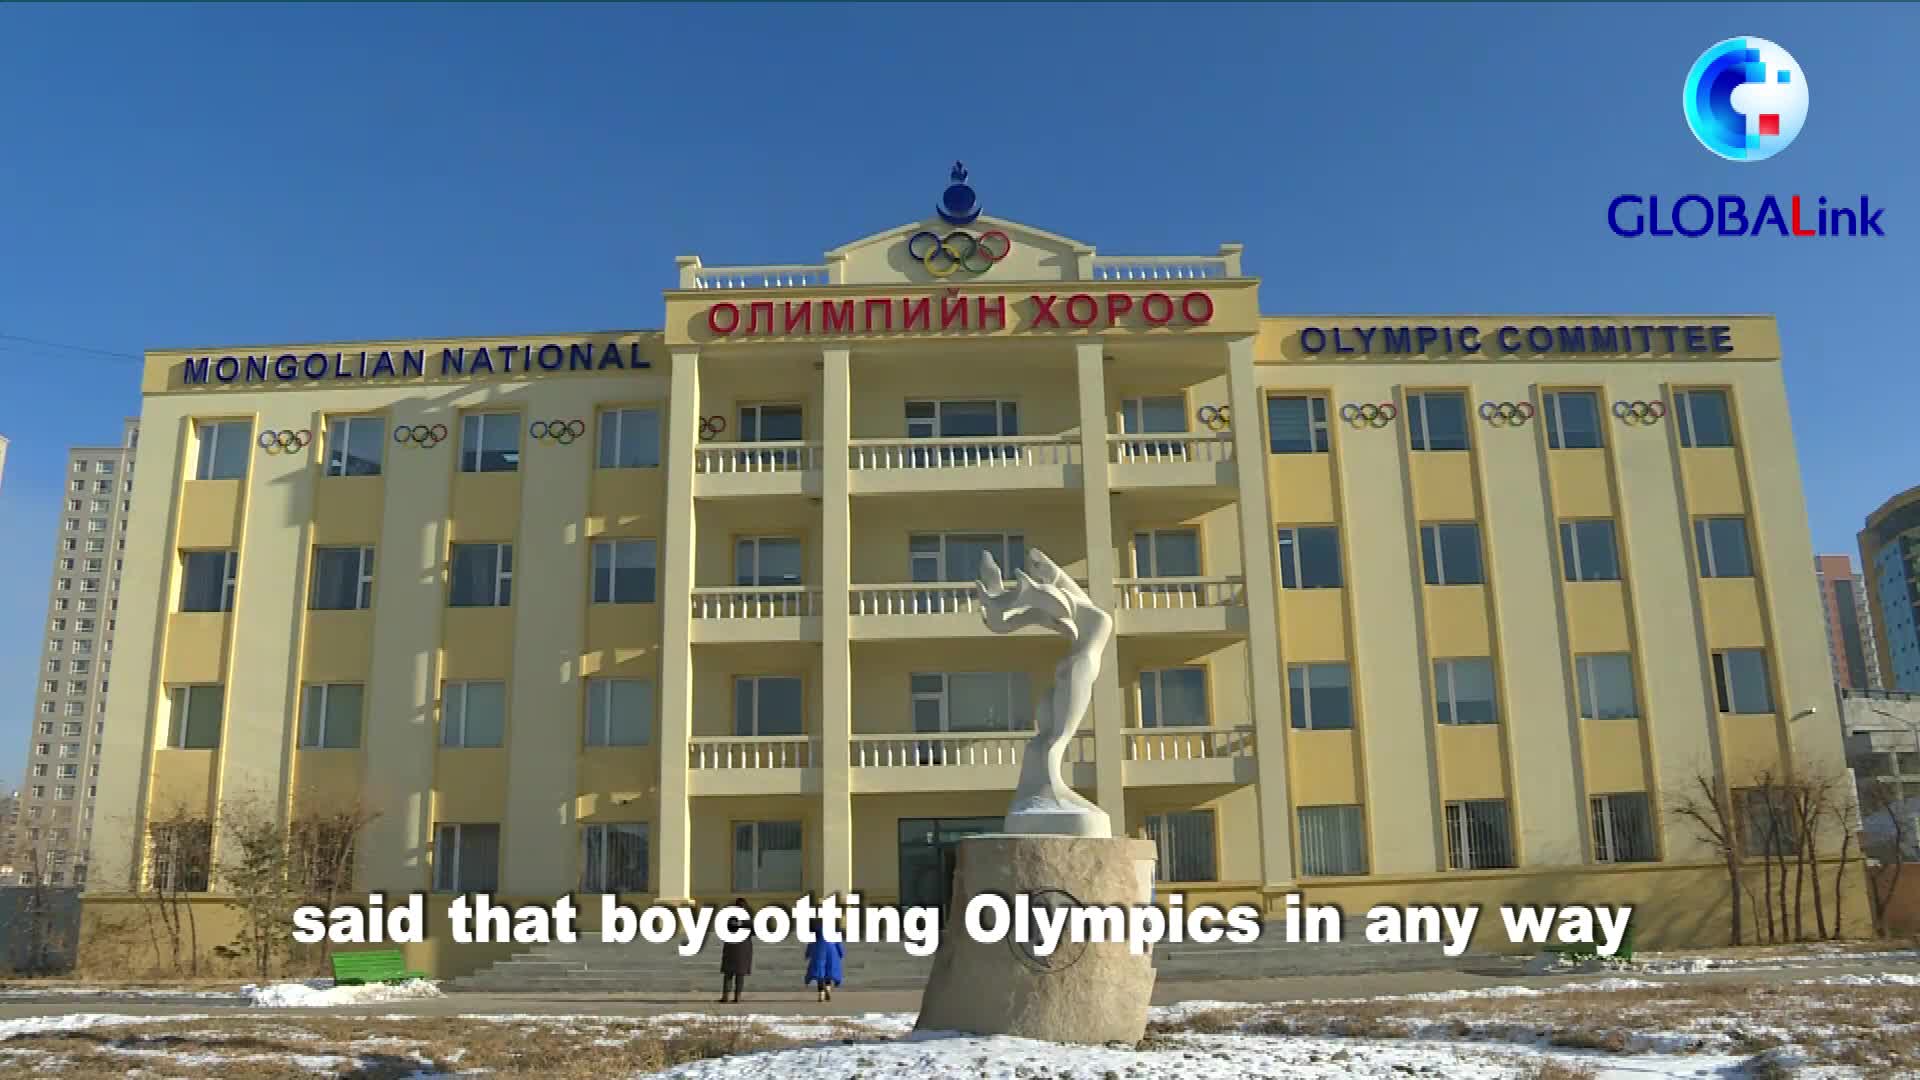 GLOBALink | Attempts to boycott Olympics in any way wrong: Mongolian official